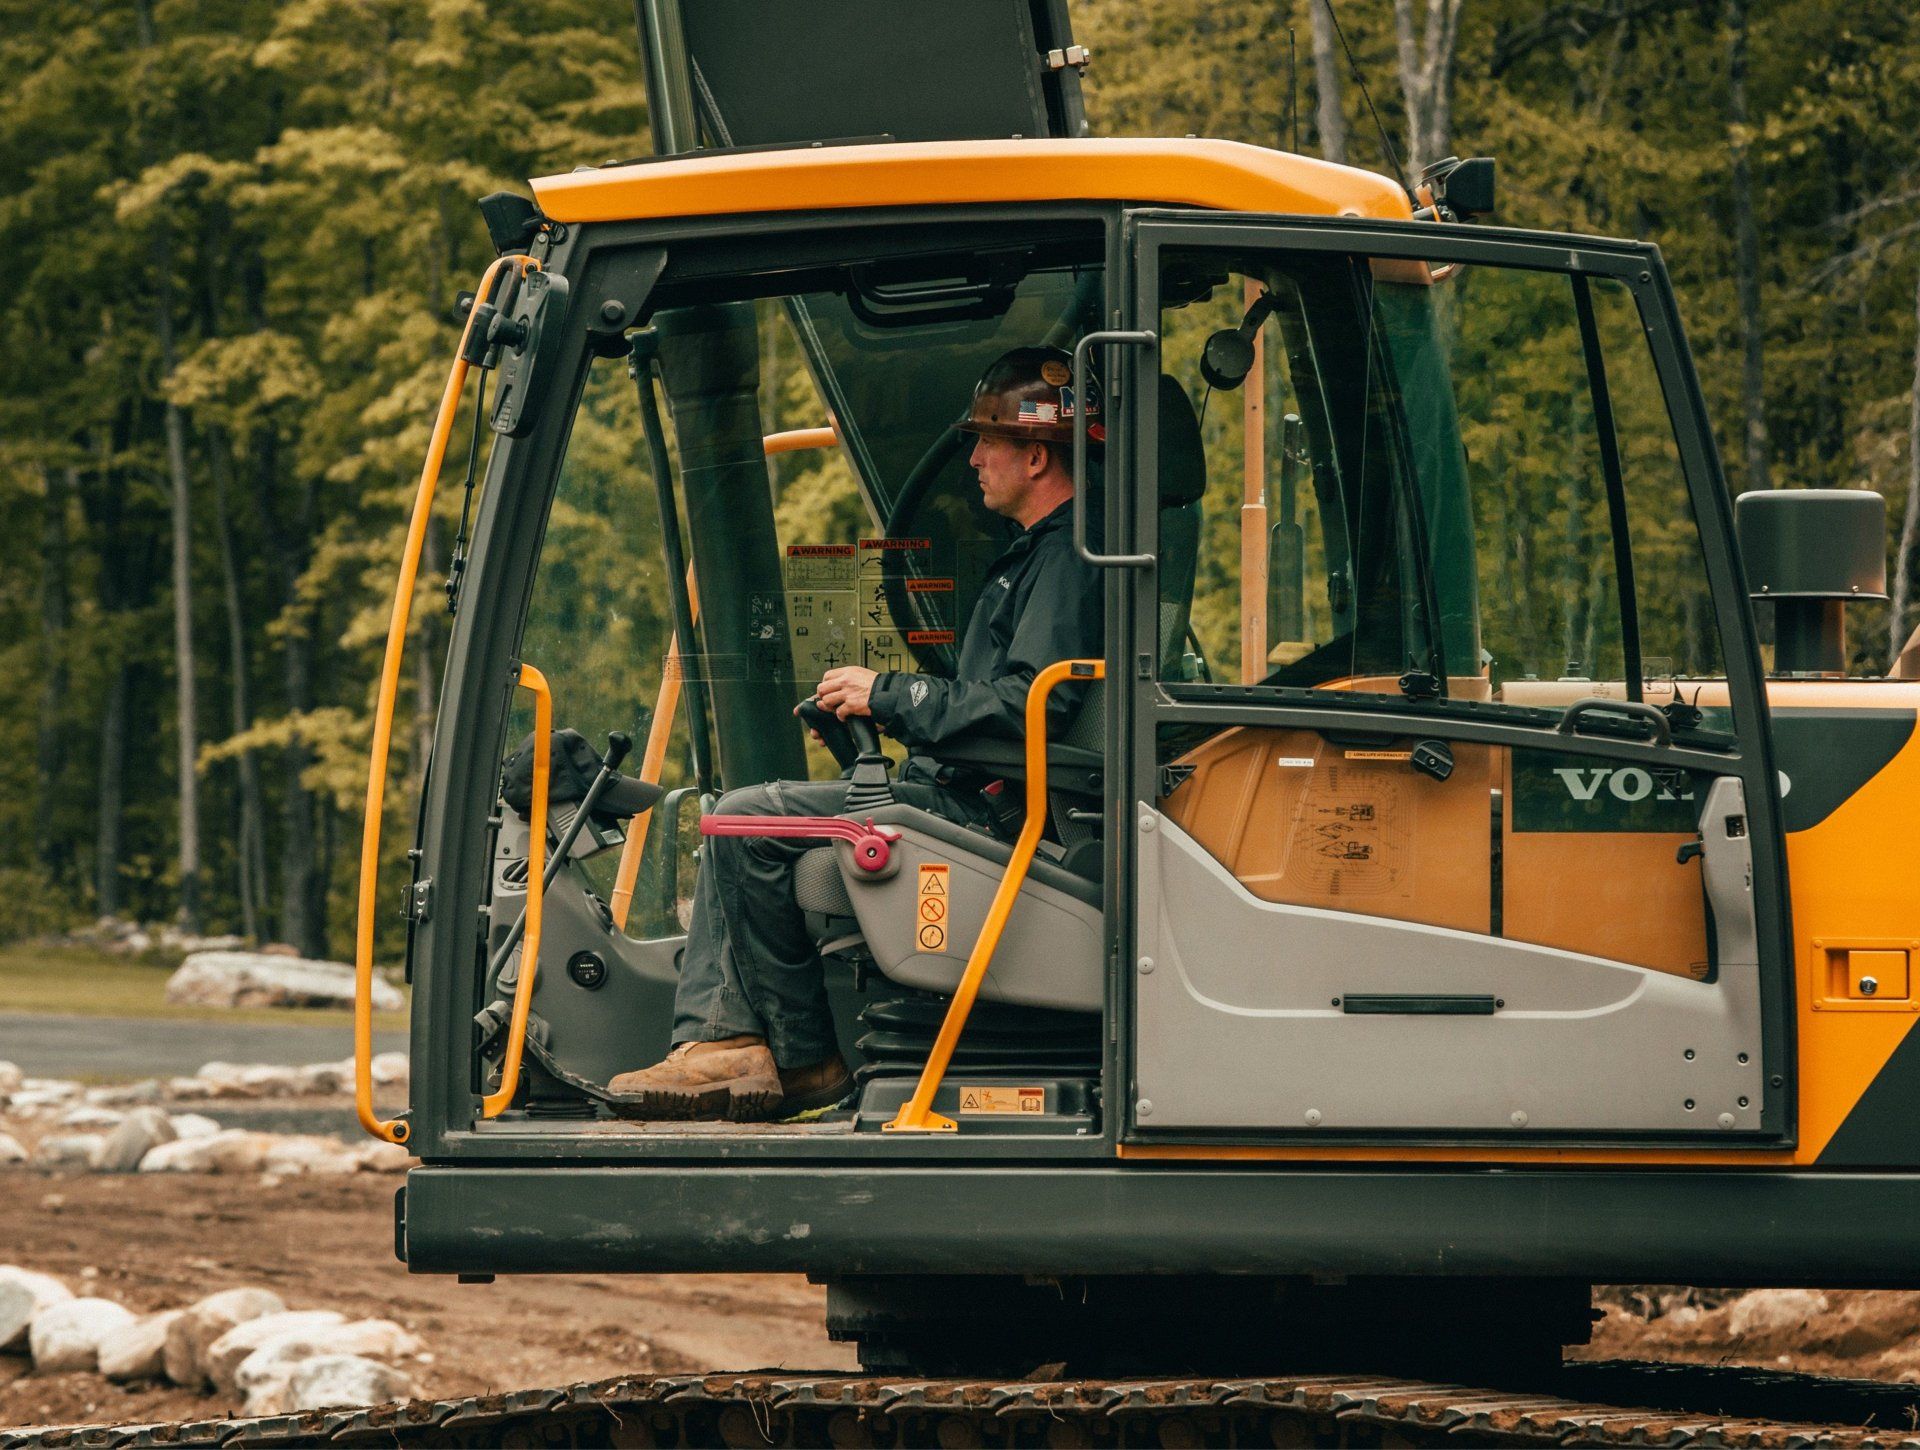 a man sits in the cab of a volvo excavator